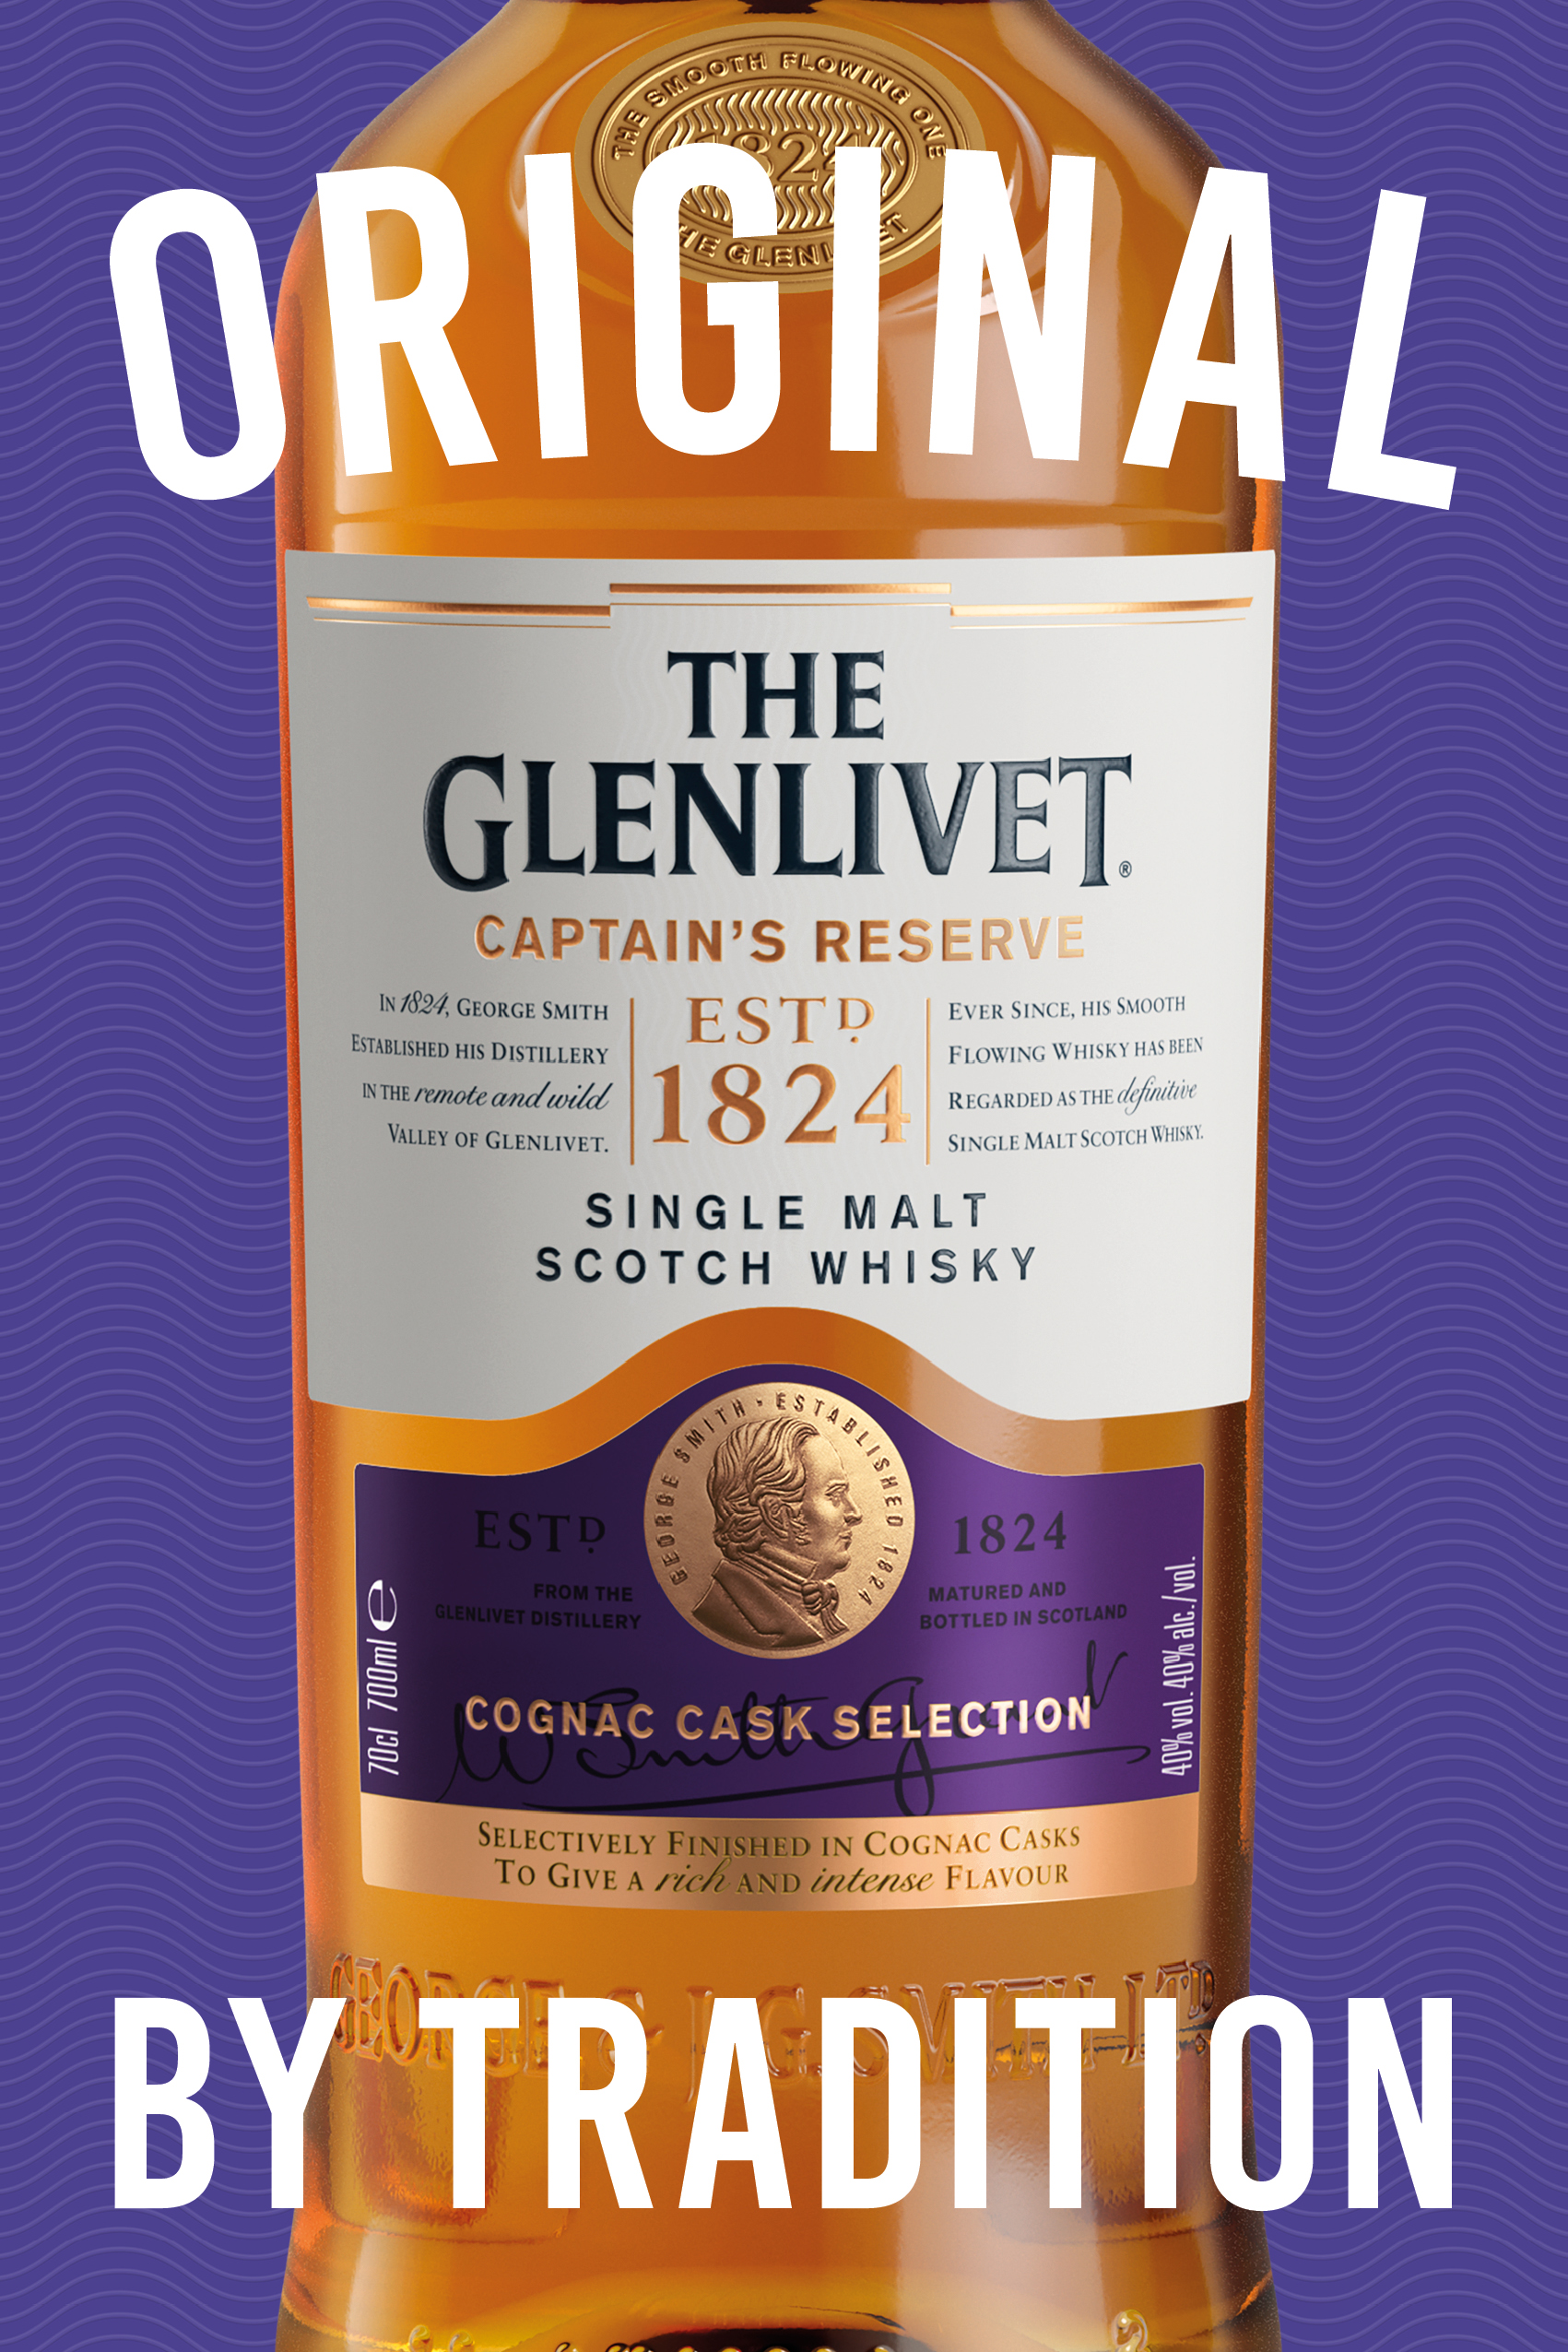 Bottle of The Glenlivet Captain's Reserve on Violet background "Original by Tradition" ad Campaign by CPB London